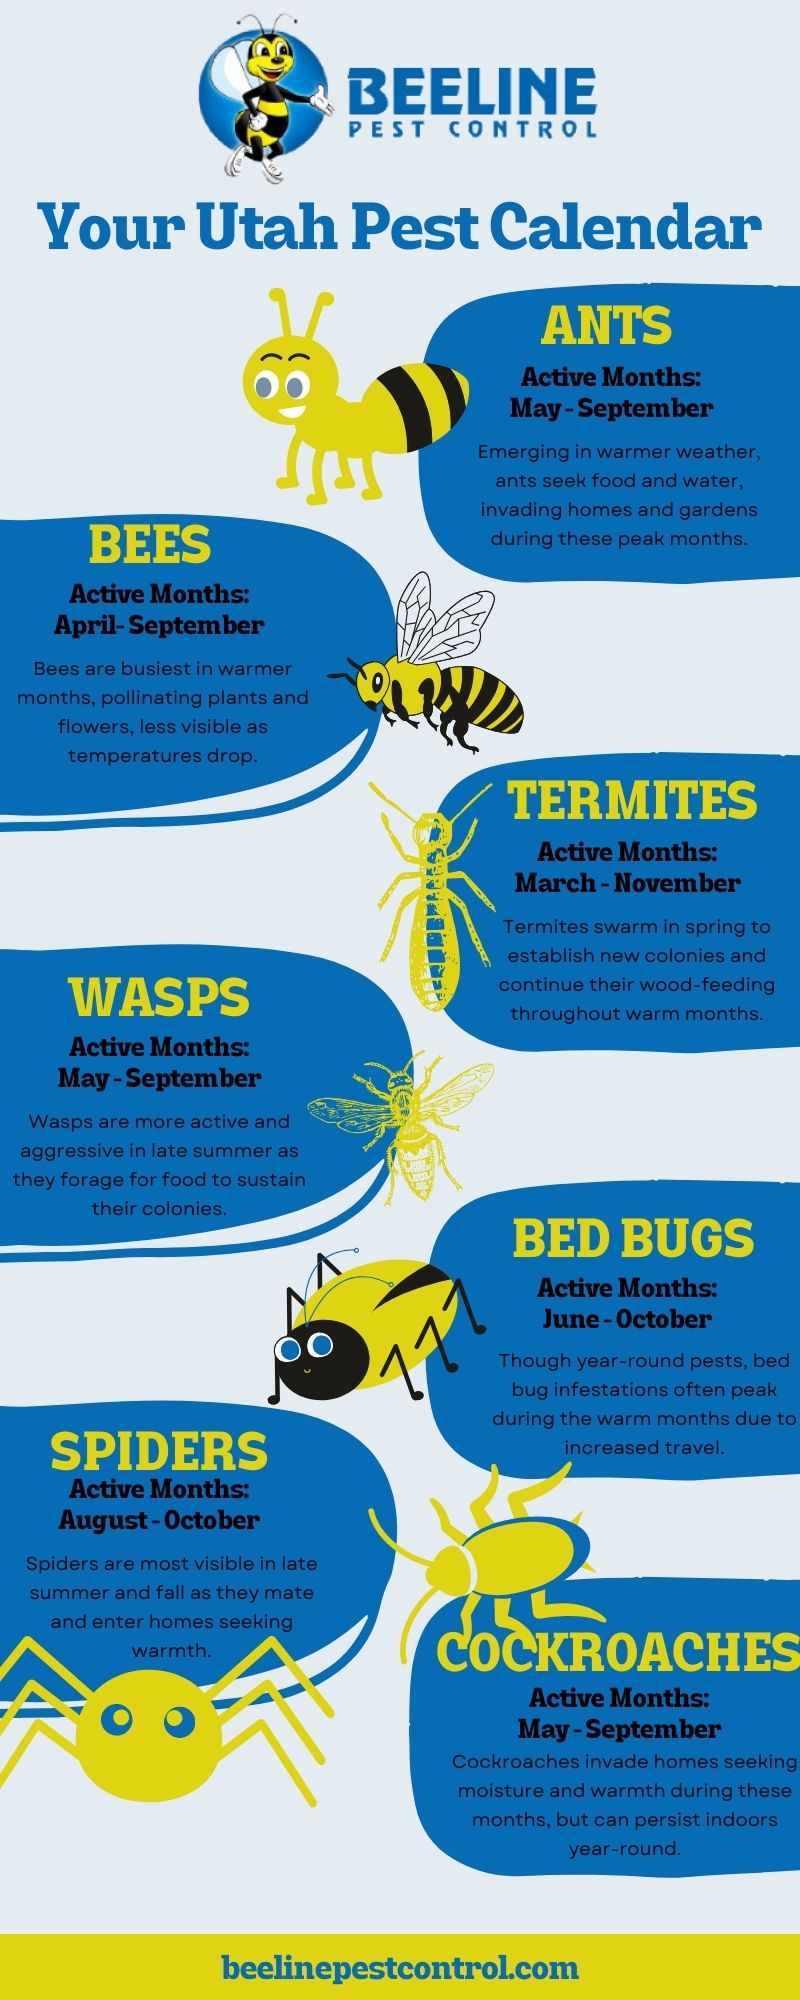 all season pest control information visualised in an infographic